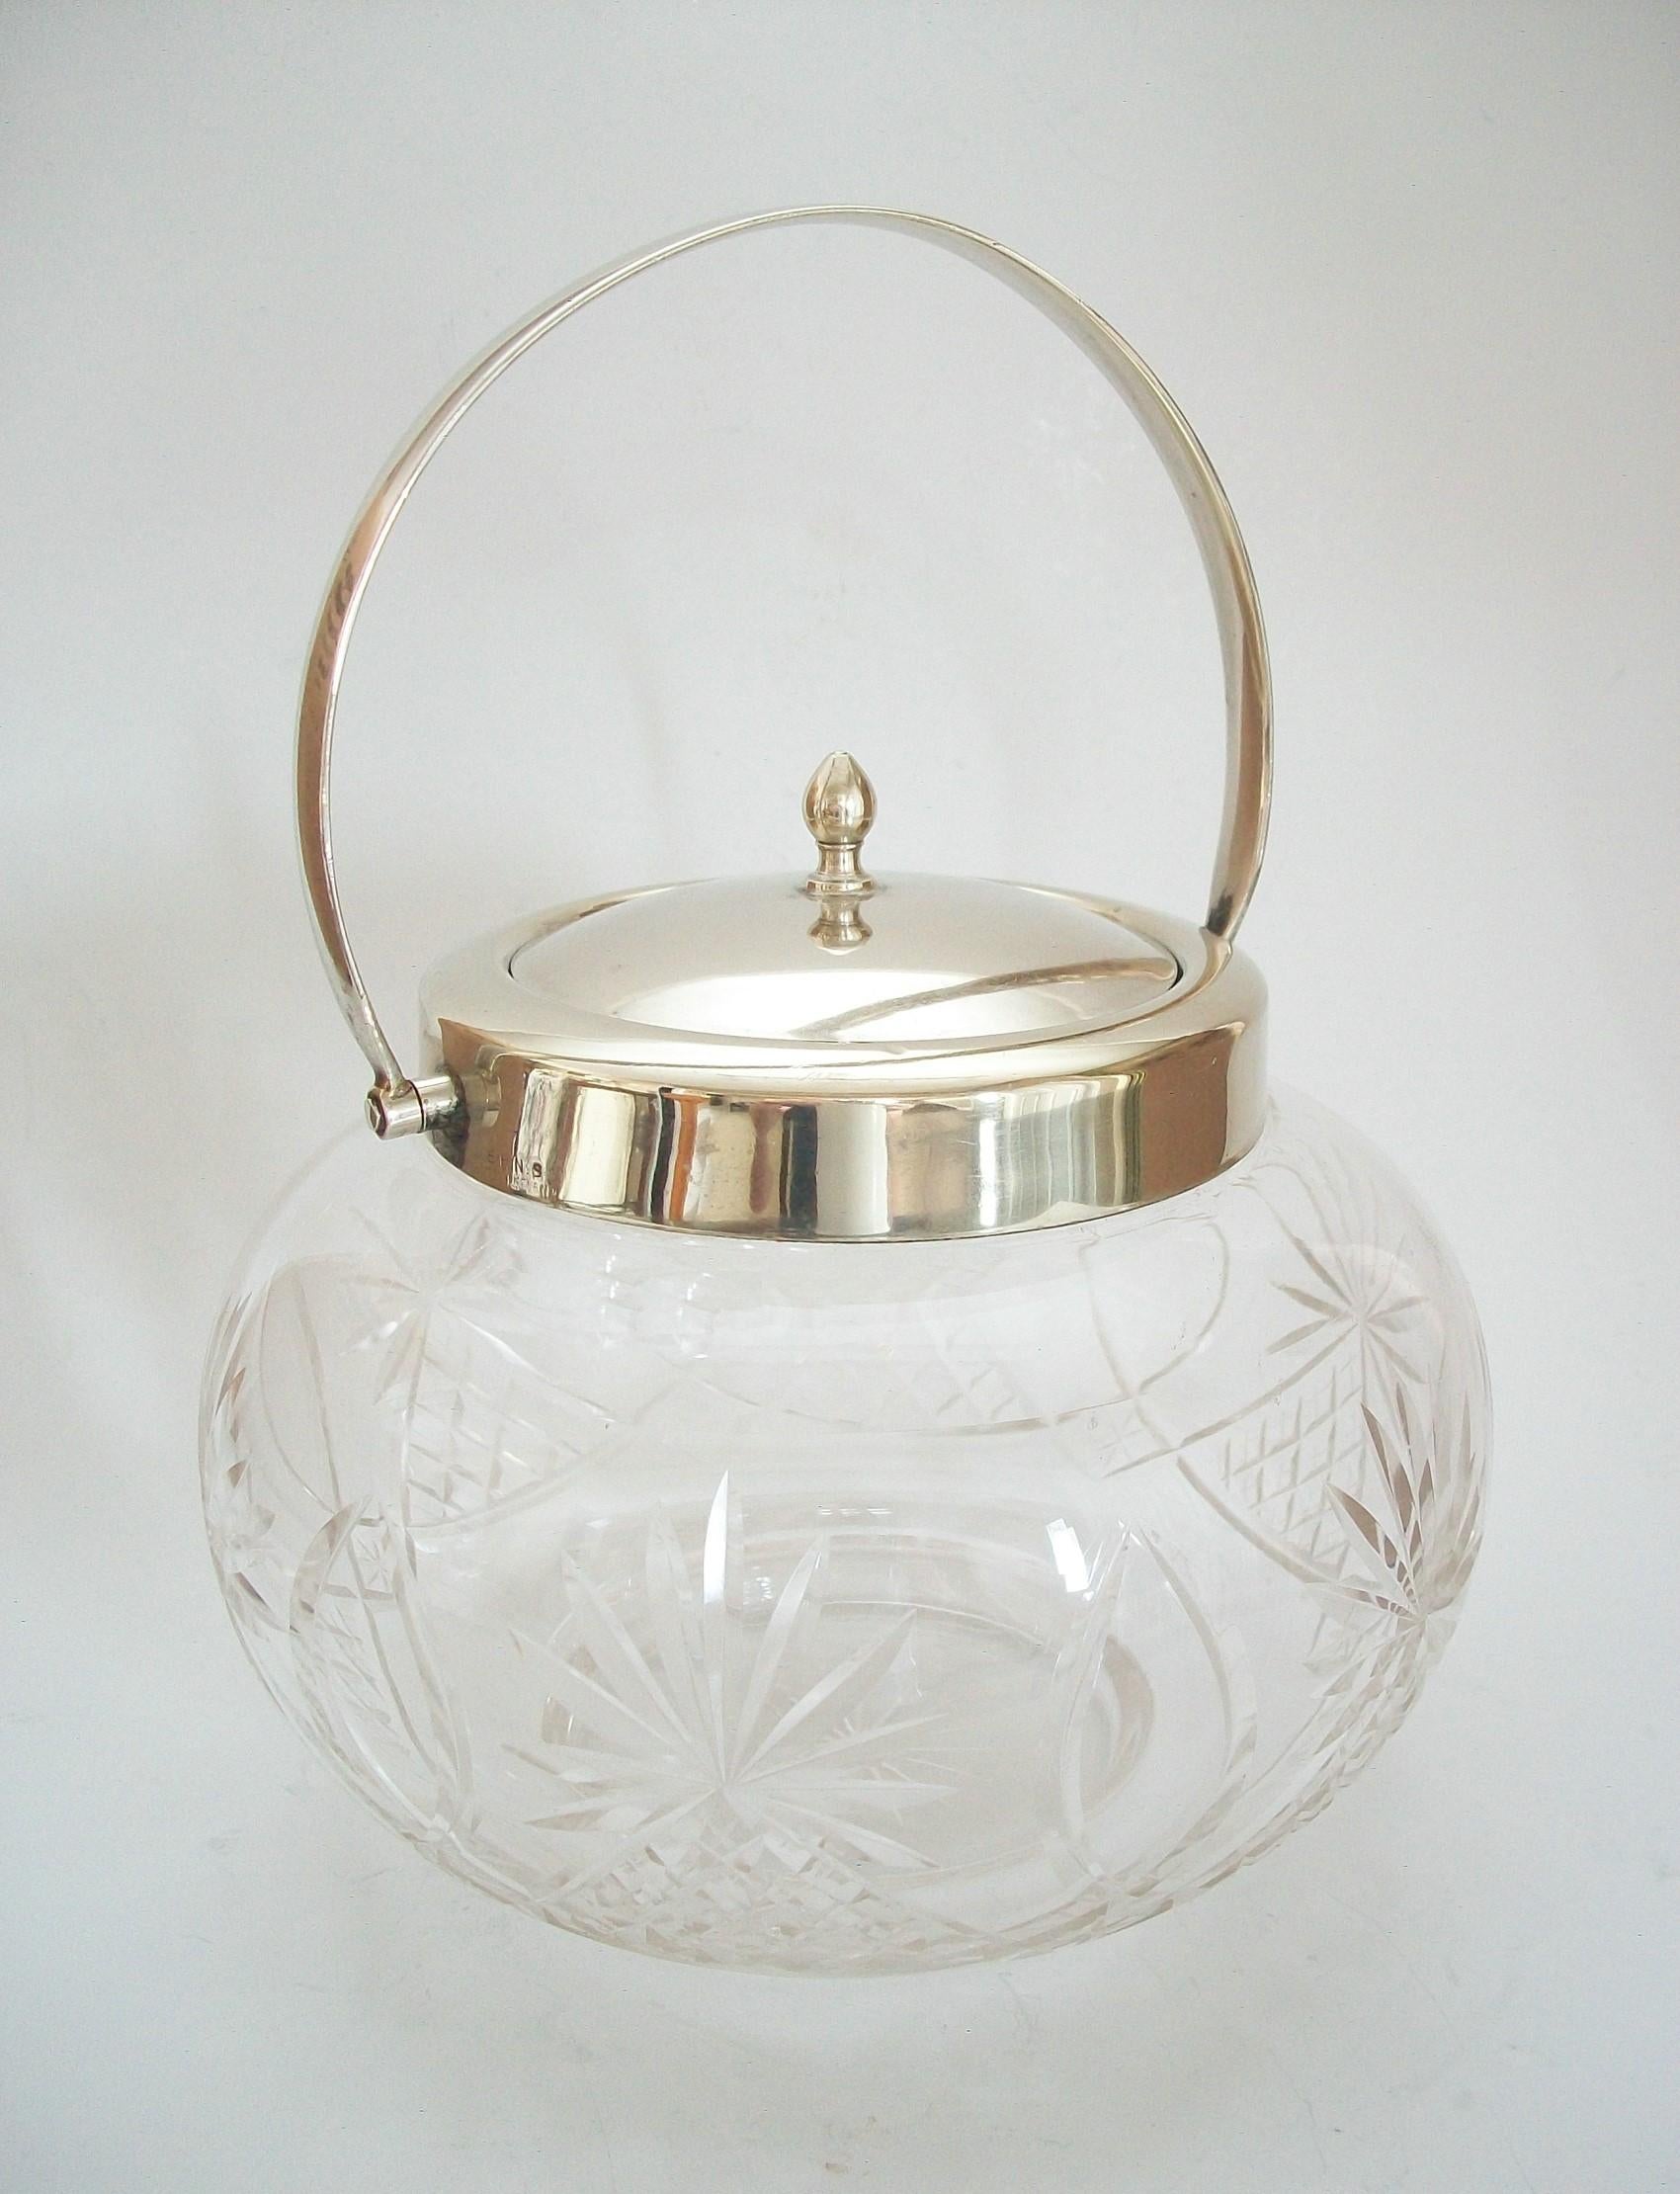 Victorian Cut Crystal & Silverplate Biscuit Barrel - United Kingdom - Early 20th Century For Sale